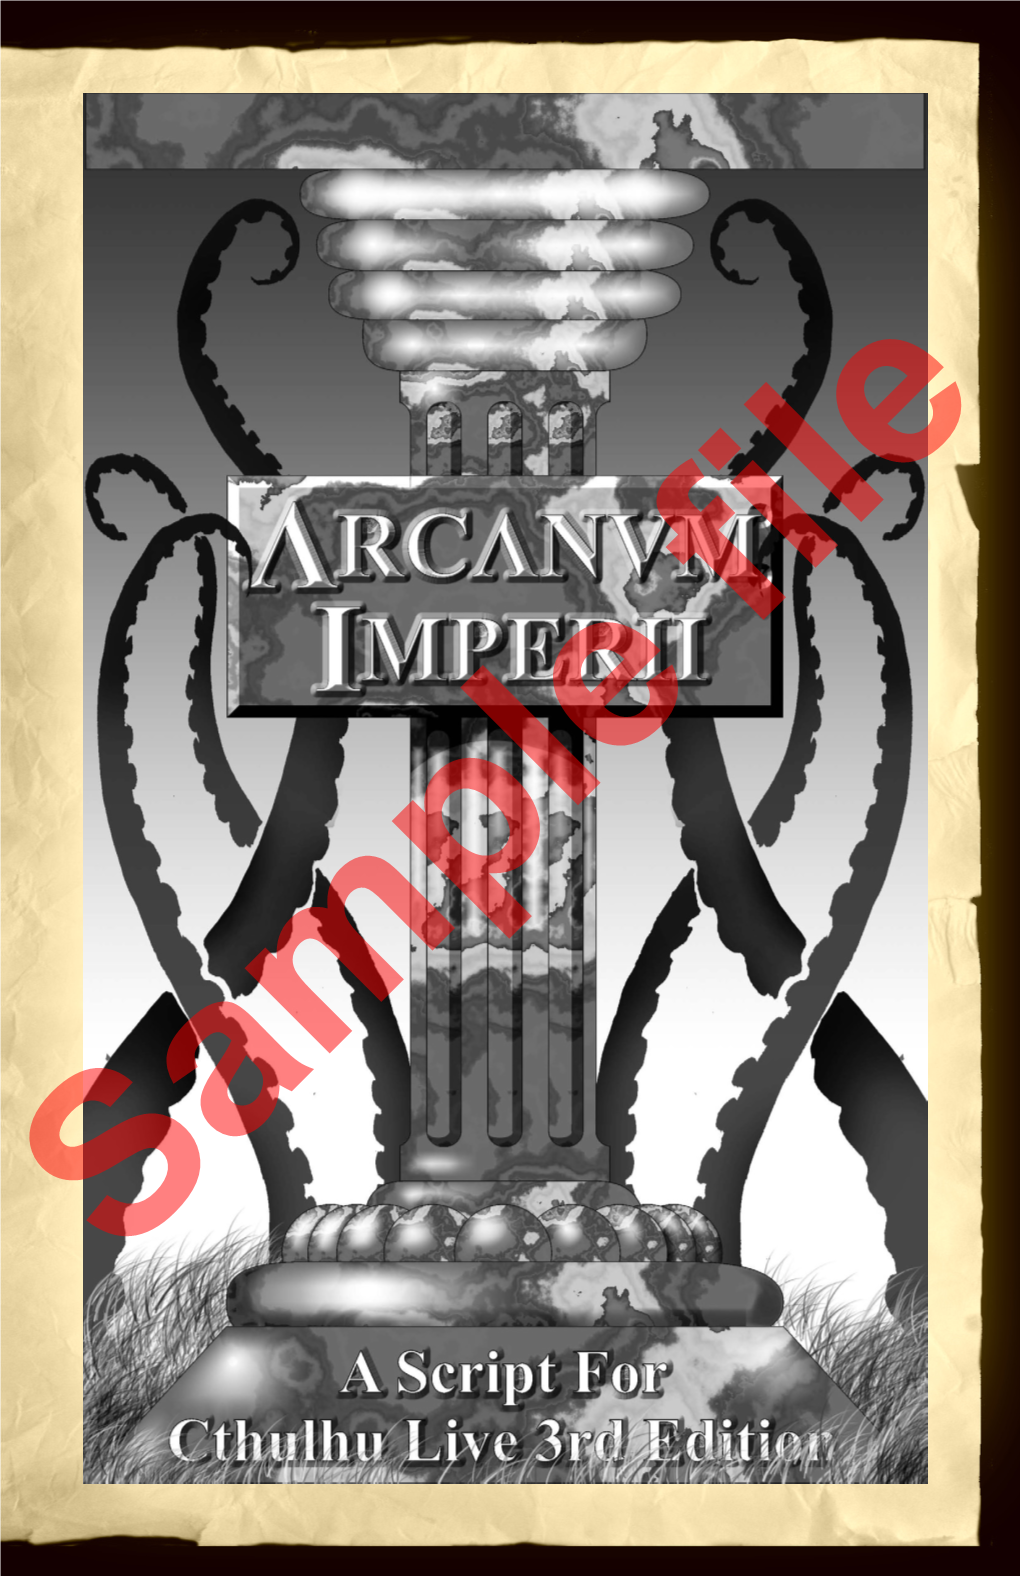 Arcanum Imperii 1 a Script for Cthulhu Live 3Rd Edition by Robert “Mac” Mclaughlin and the Skirmisher Game Development Group